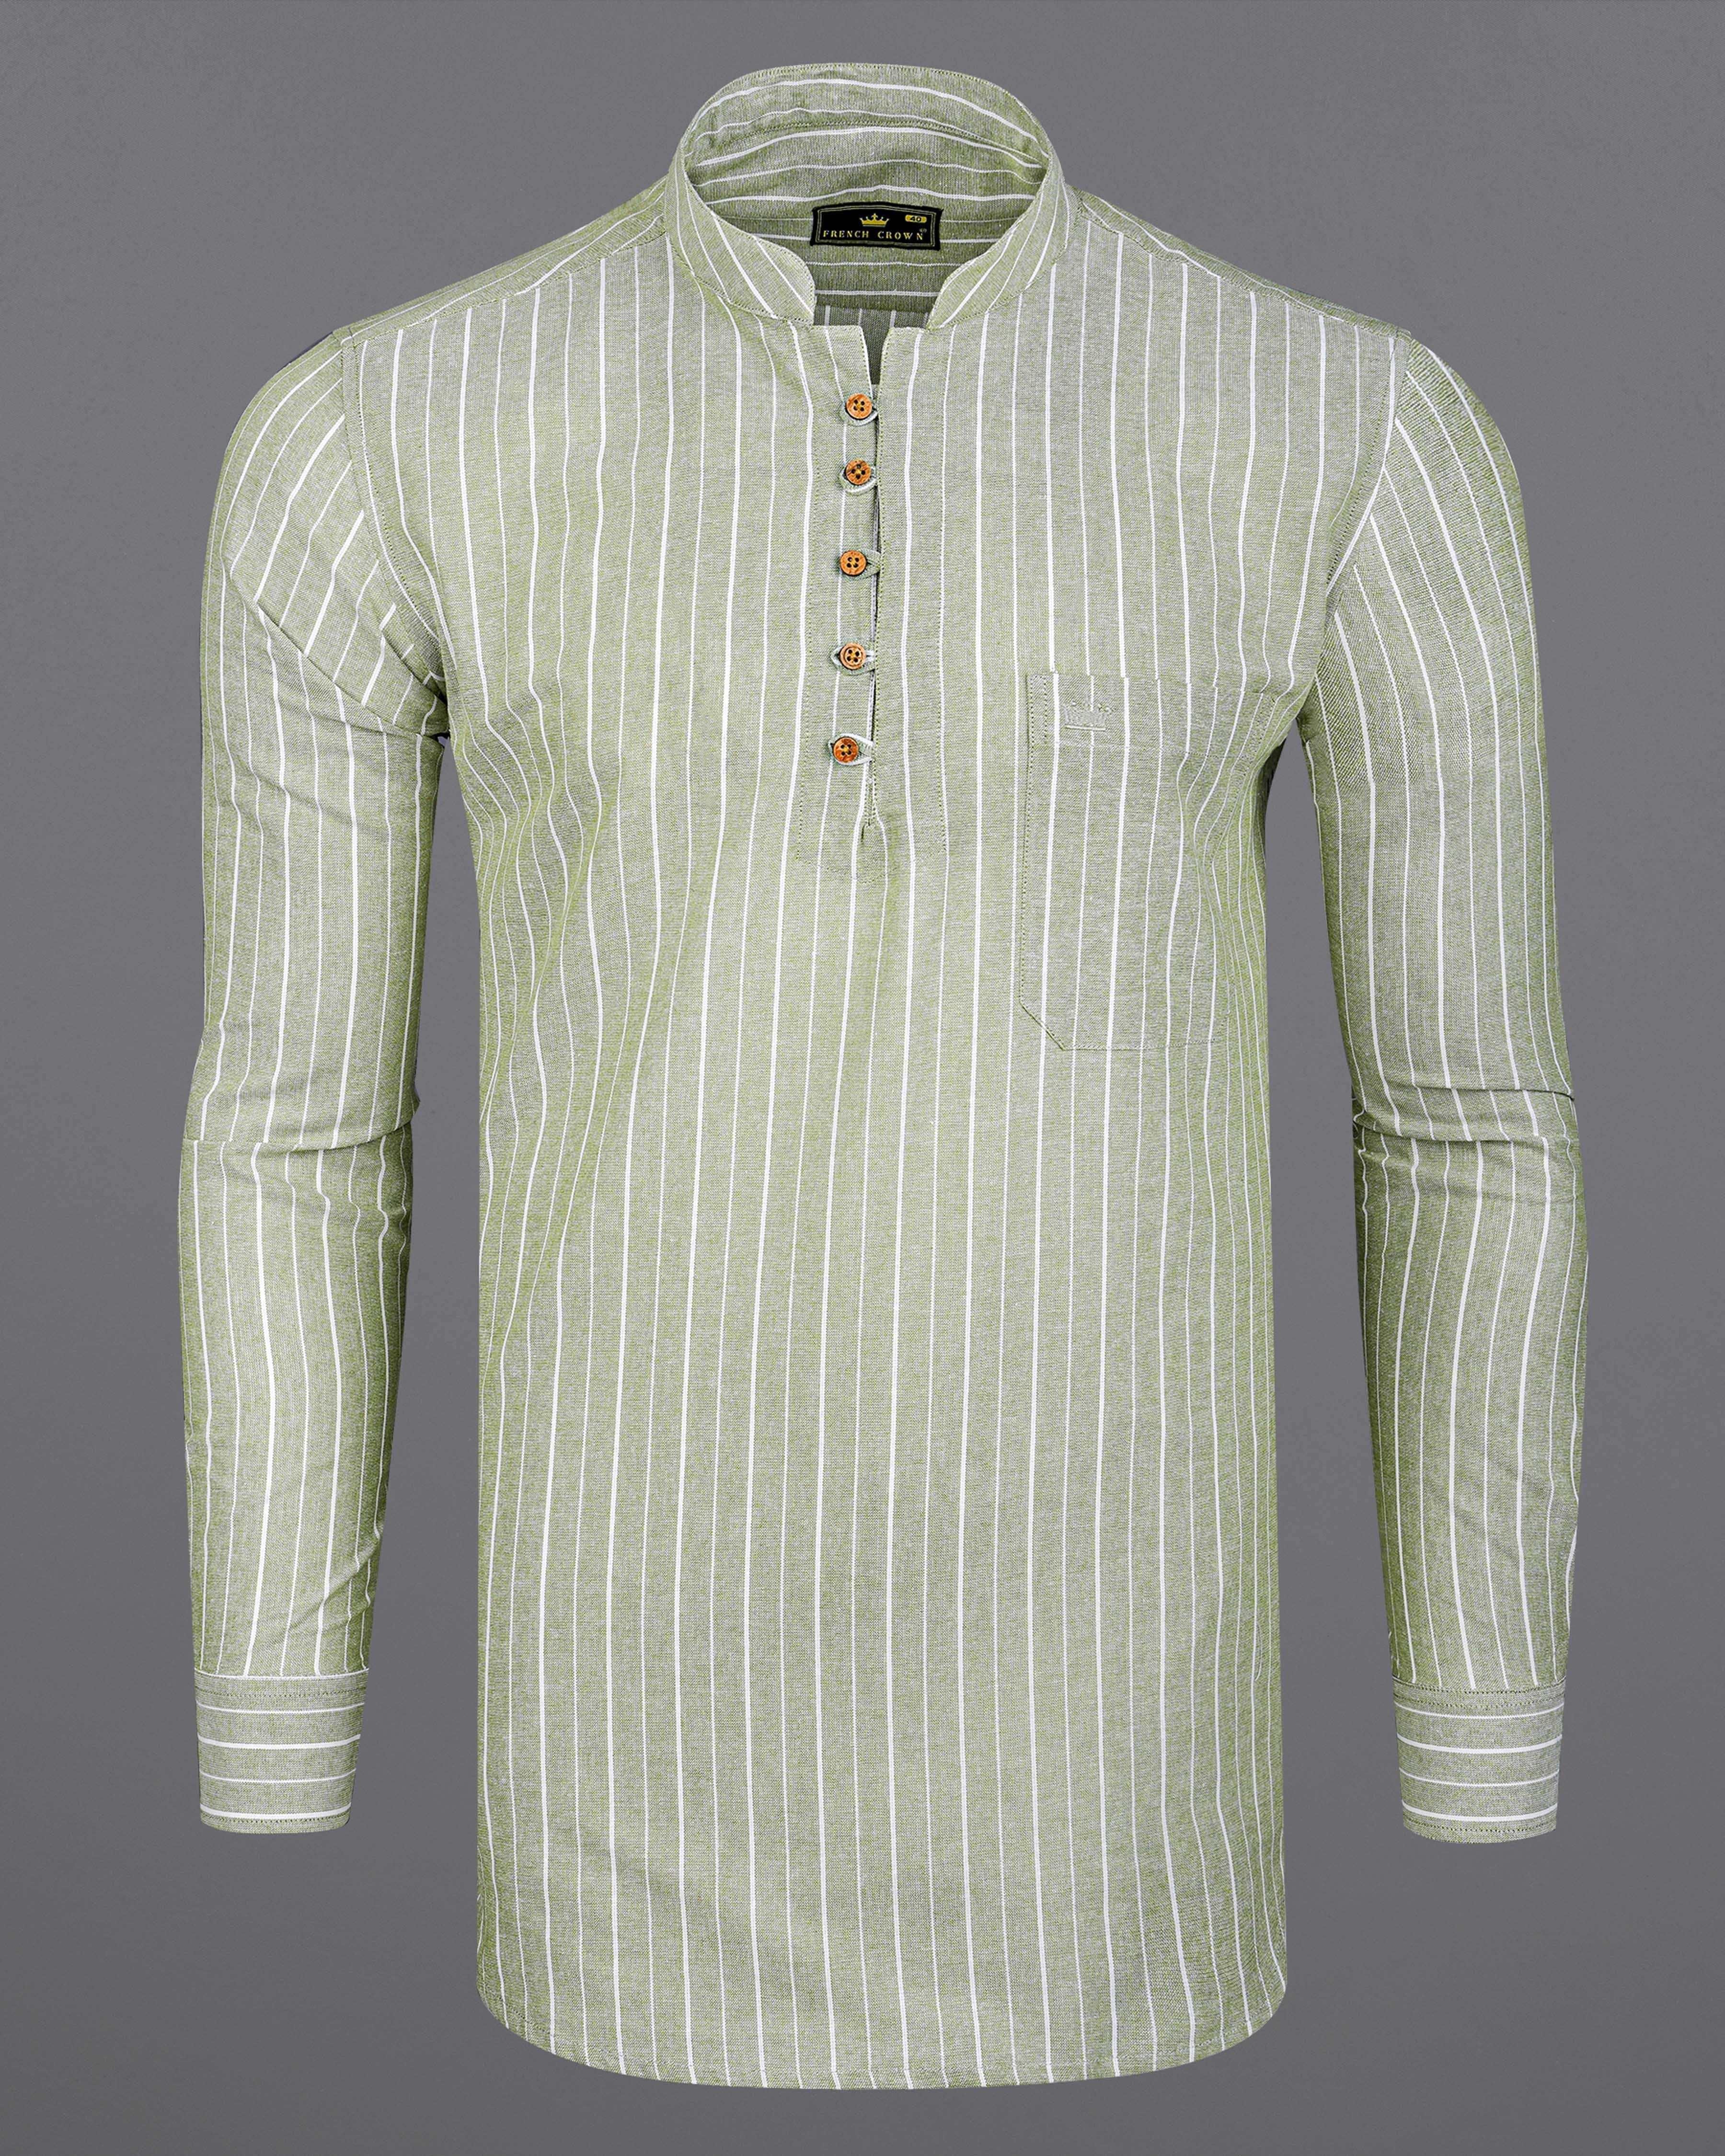 Beryl Green and White Striped Royal Oxford Kurta Shirt 8325-KS -38,8325-KS -H-38,8325-KS -39,8325-KS -H-39,8325-KS -40,8325-KS -H-40,8325-KS -42,8325-KS -H-42,8325-KS -44,8325-KS -H-44,8325-KS -46,8325-KS -H-46,8325-KS -48,8325-KS -H-48,8325-KS -50,8325-KS -H-50,8325-KS -52,8325-KS -H-52